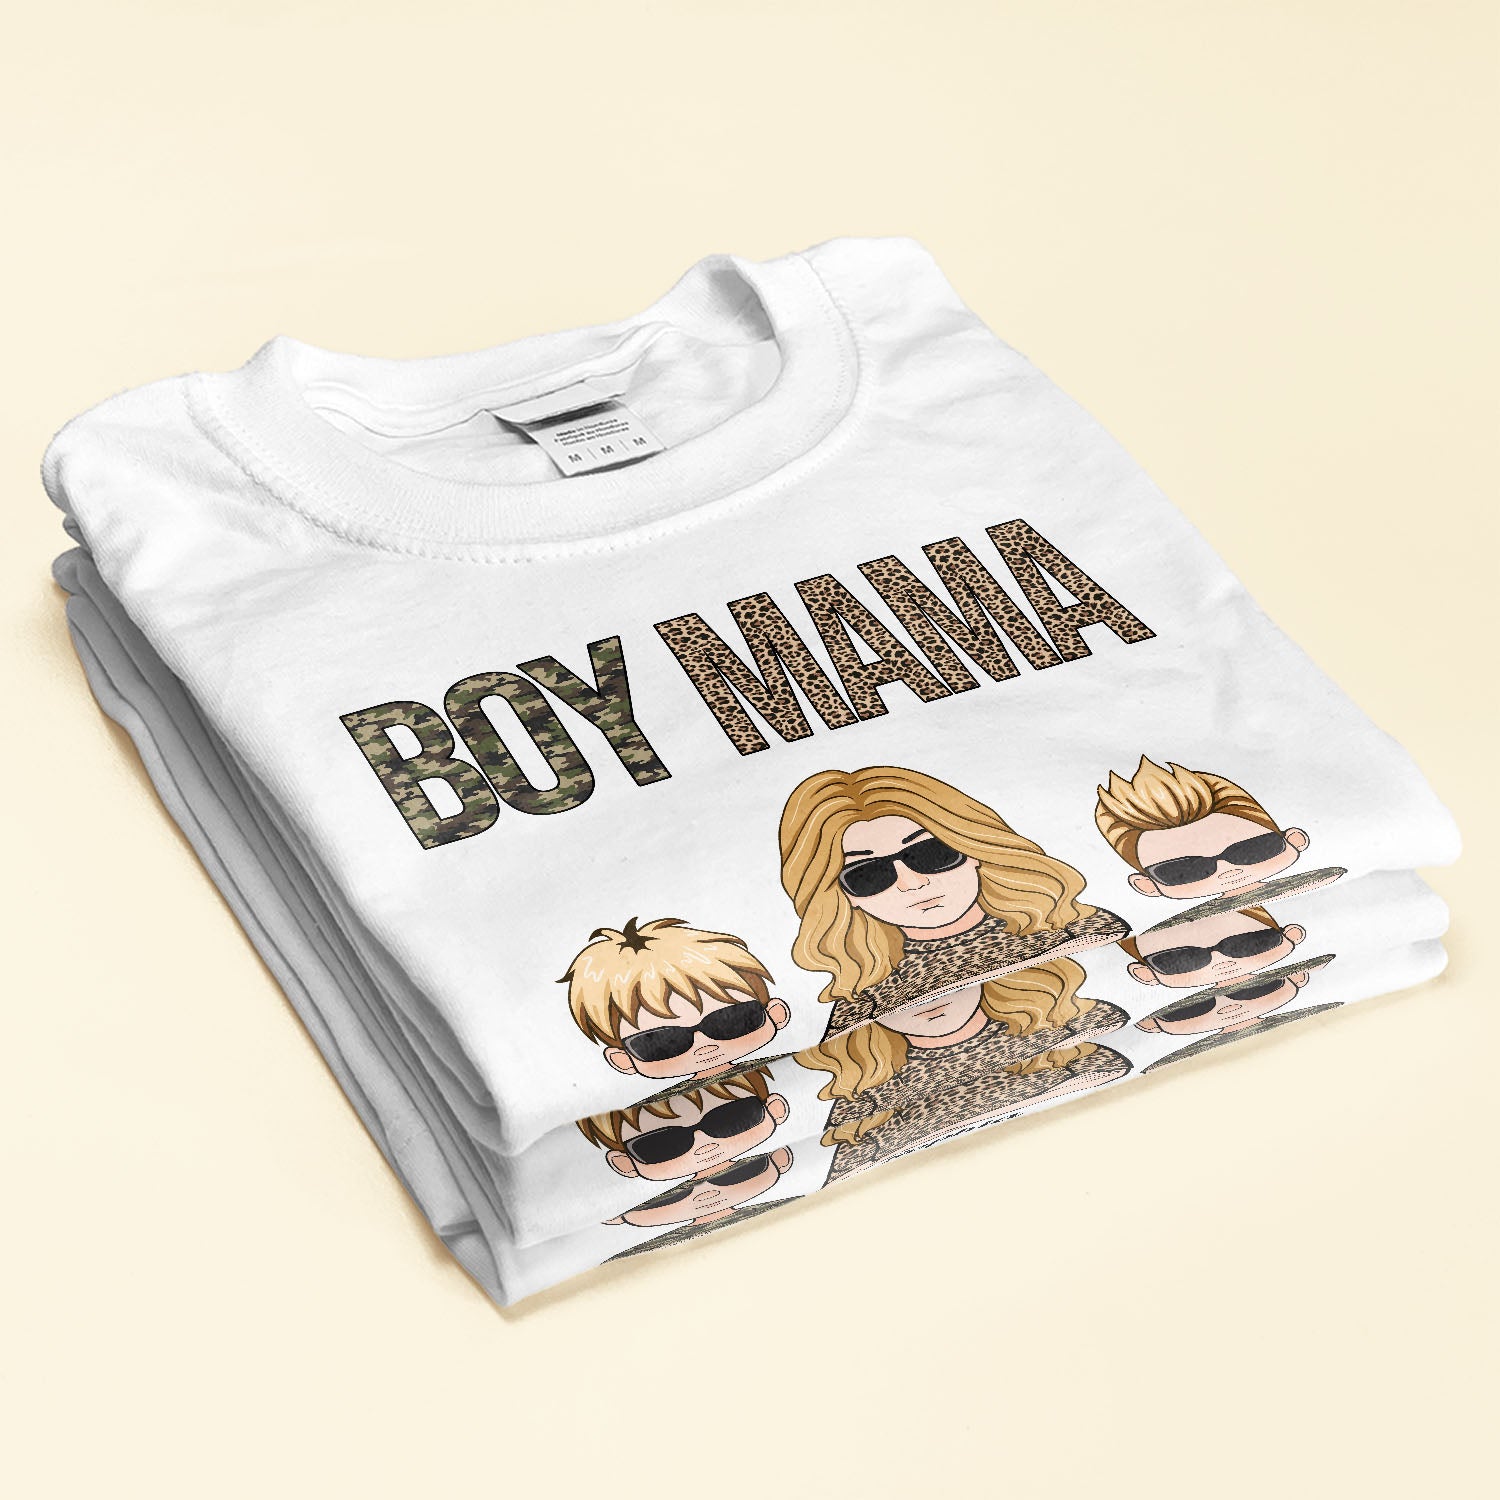 Boy mom T-Shirt, Cozy Gifts For Mom